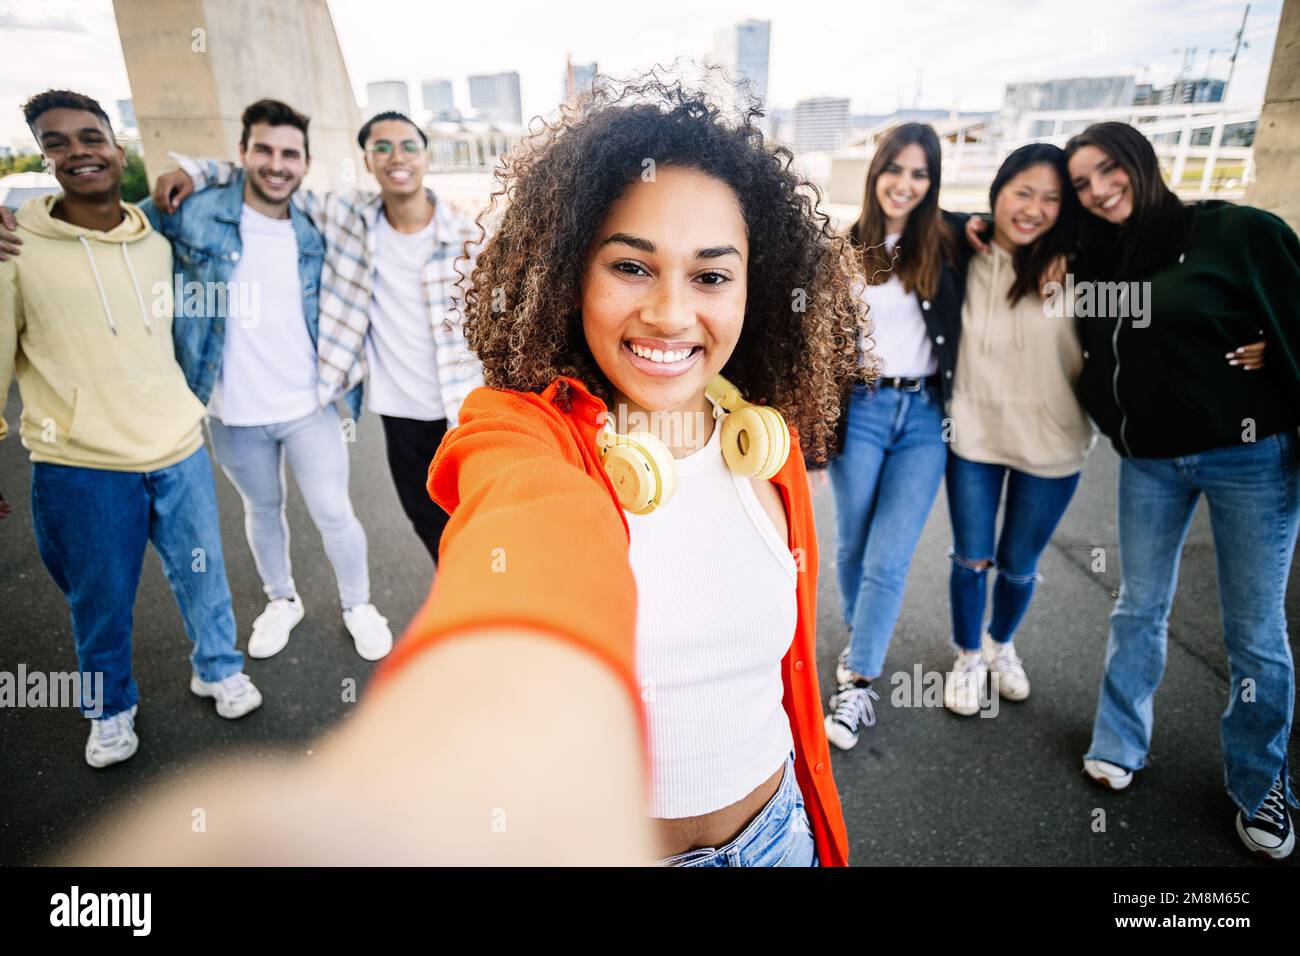 University student friends taking selfie group together at campus college Stock Photo